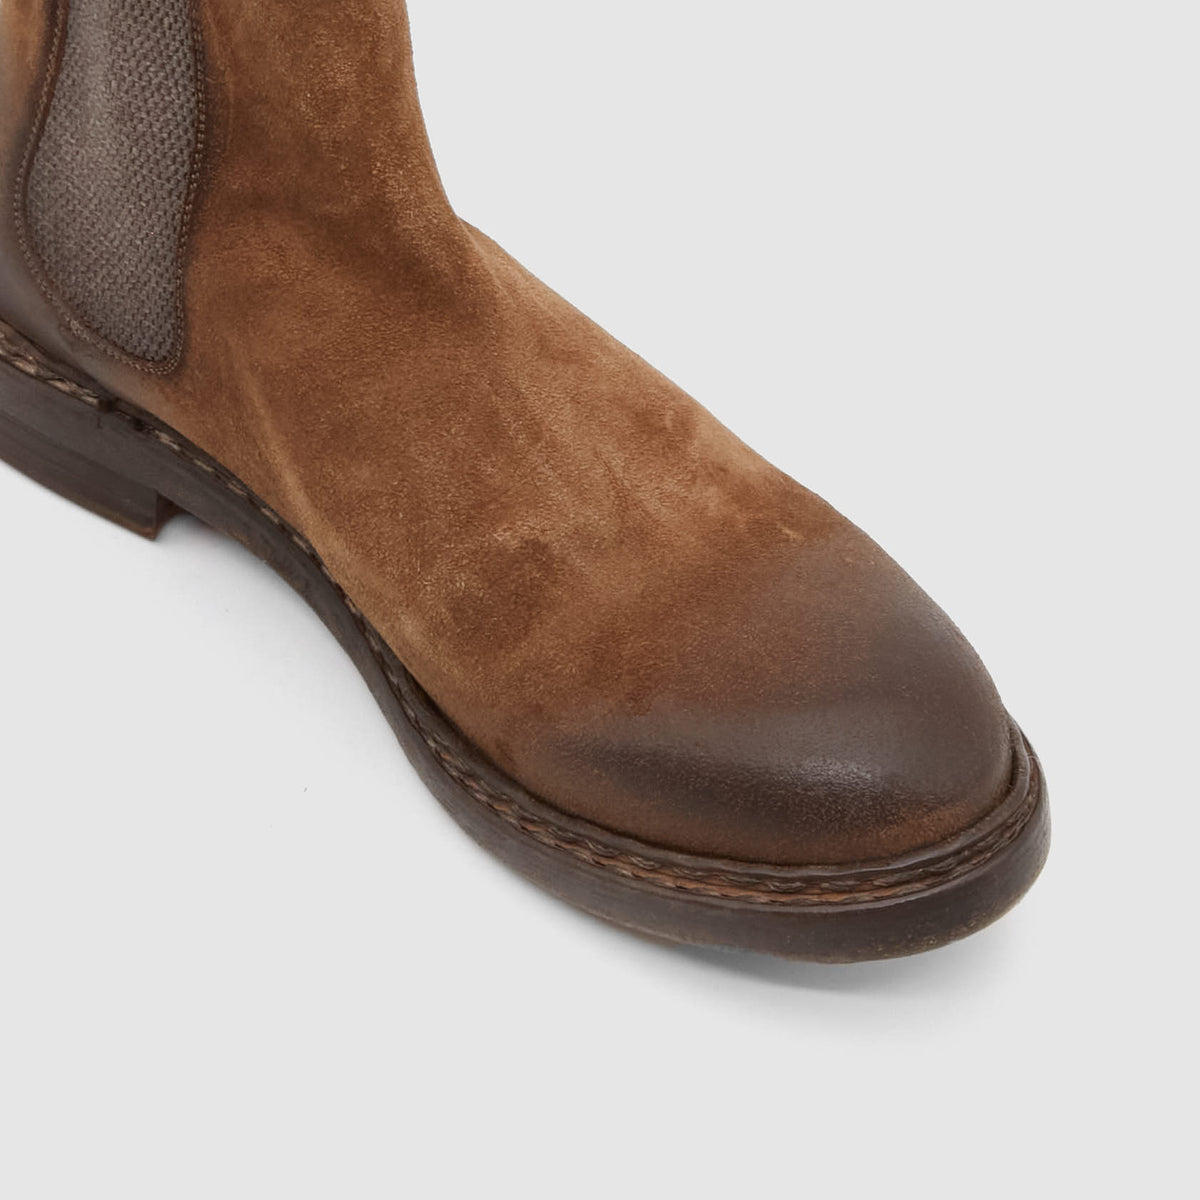 Crispiniano Roughout Suede Chelsea Boot